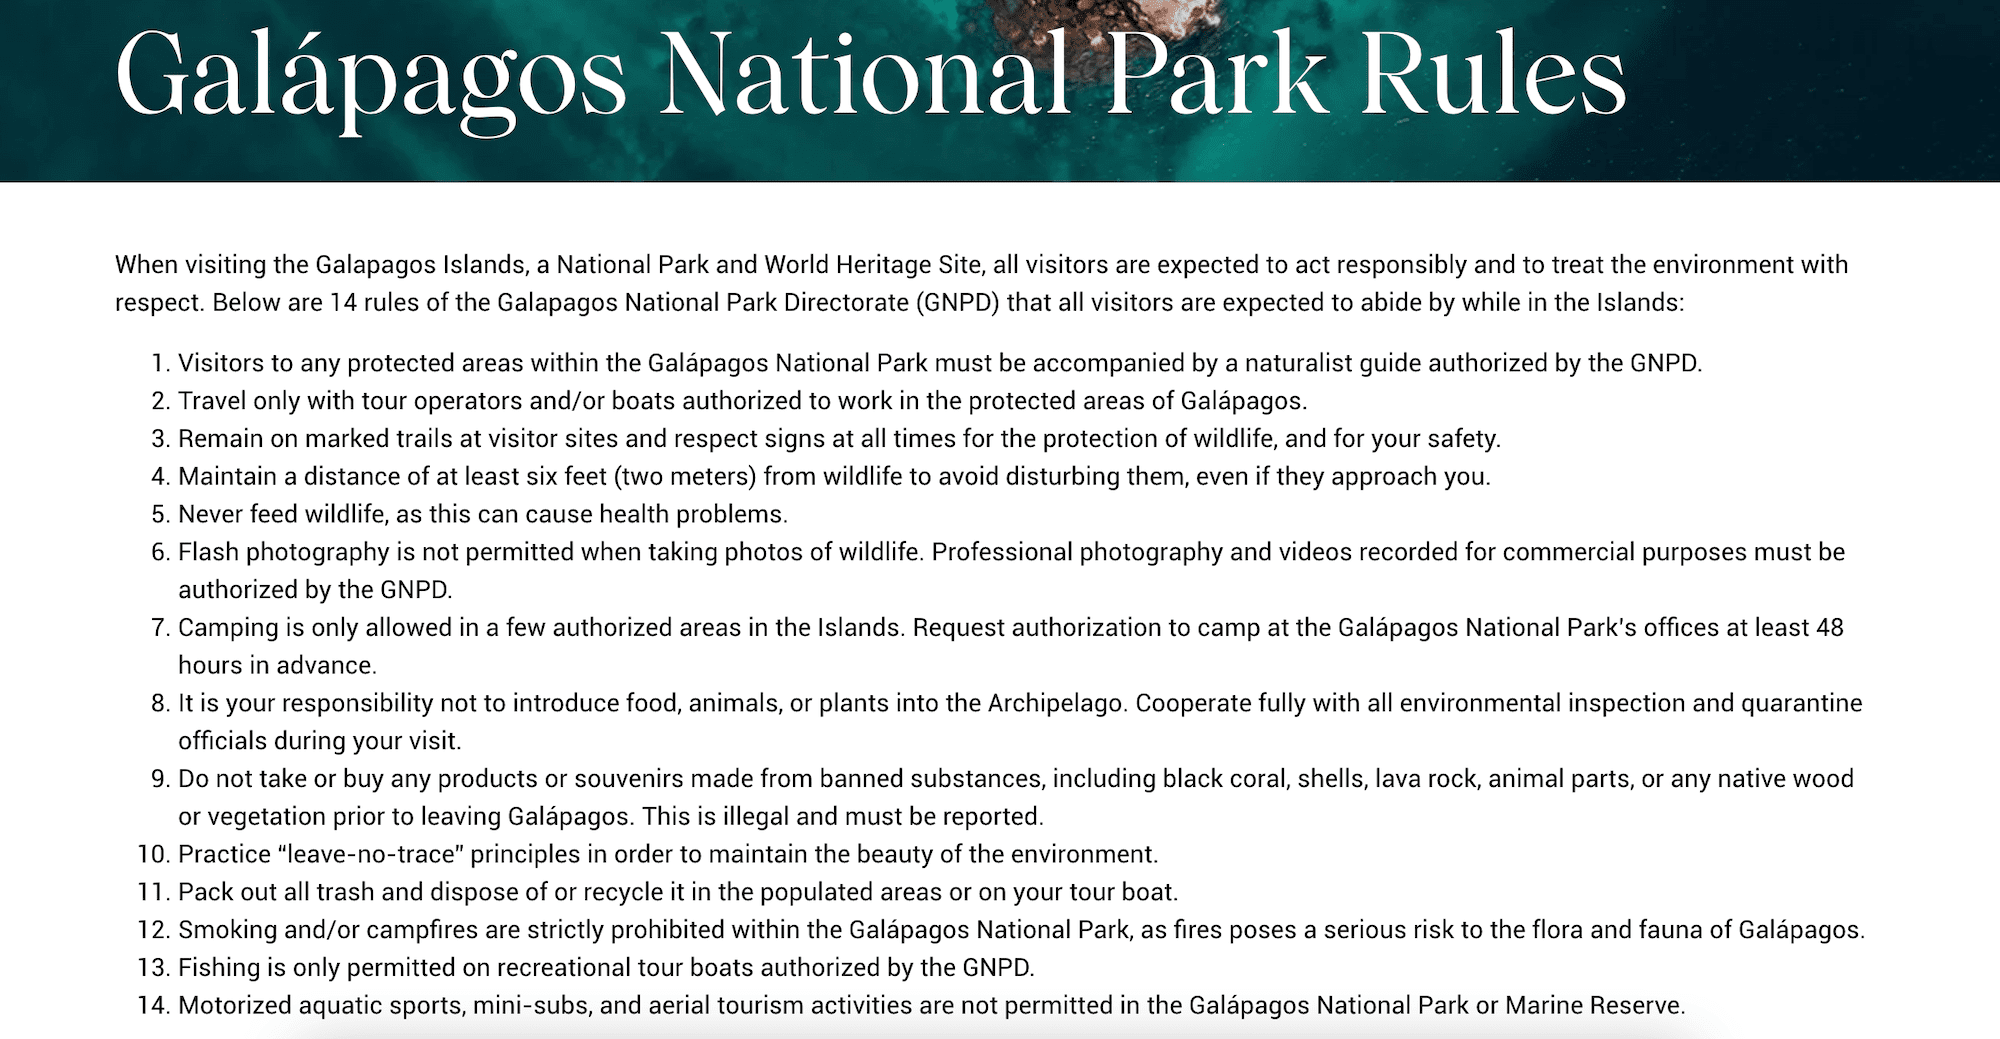 Rules all visitors must follow while visiting the Galapagos Islands